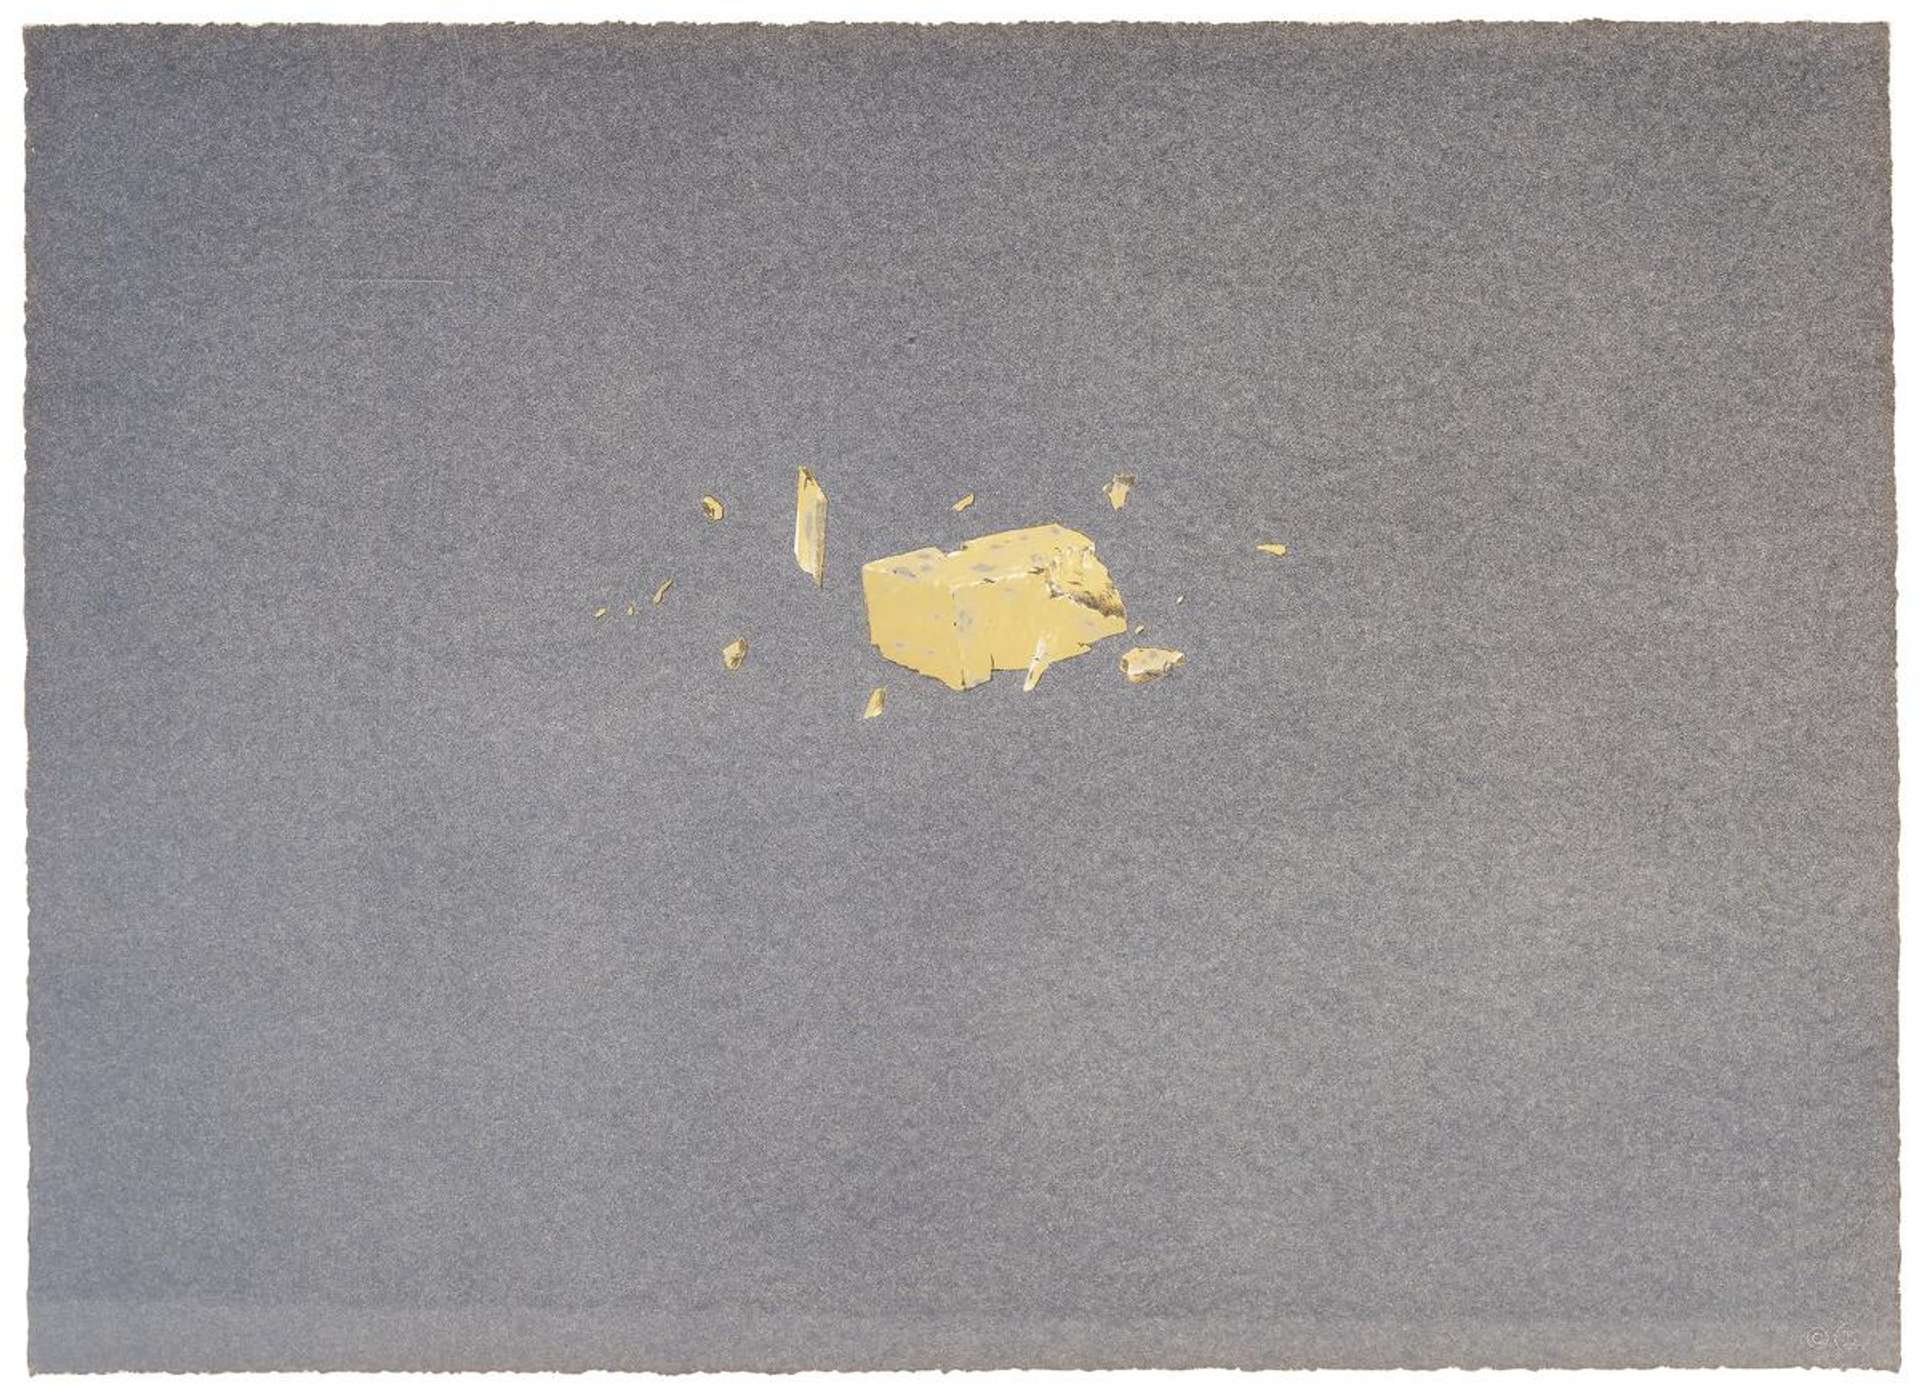 Exploding Cheese - Signed Print by Ed Ruscha 1976 - MyArtBroker